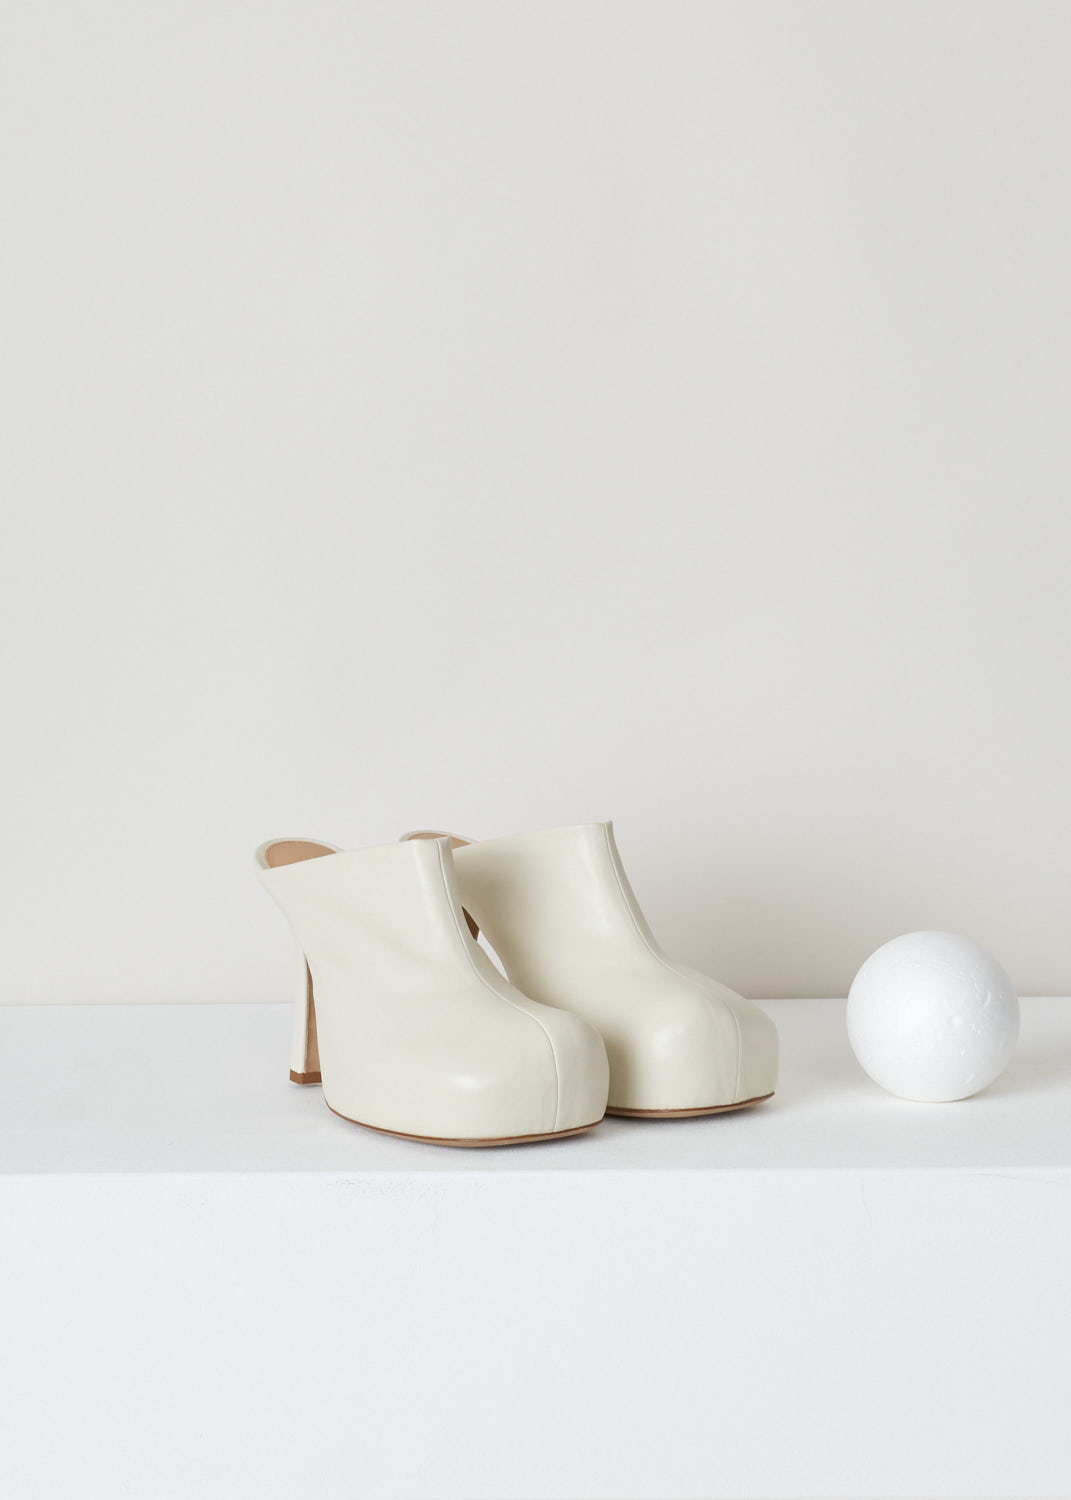 Bottega Veneta, Cream colored square cut platform mules, 630148_VBP40_8279_stretch_nappa_lambskin, white, front, Lovely lambskin mules sat on top a platform to give you more height. Featuring square cut toes in stretchy lambskin leather makes this model very comfy to walk on. furthermore this model is has leather lining sole and uppers. 

Heel Height: 11 cm / 4.3 inch. 